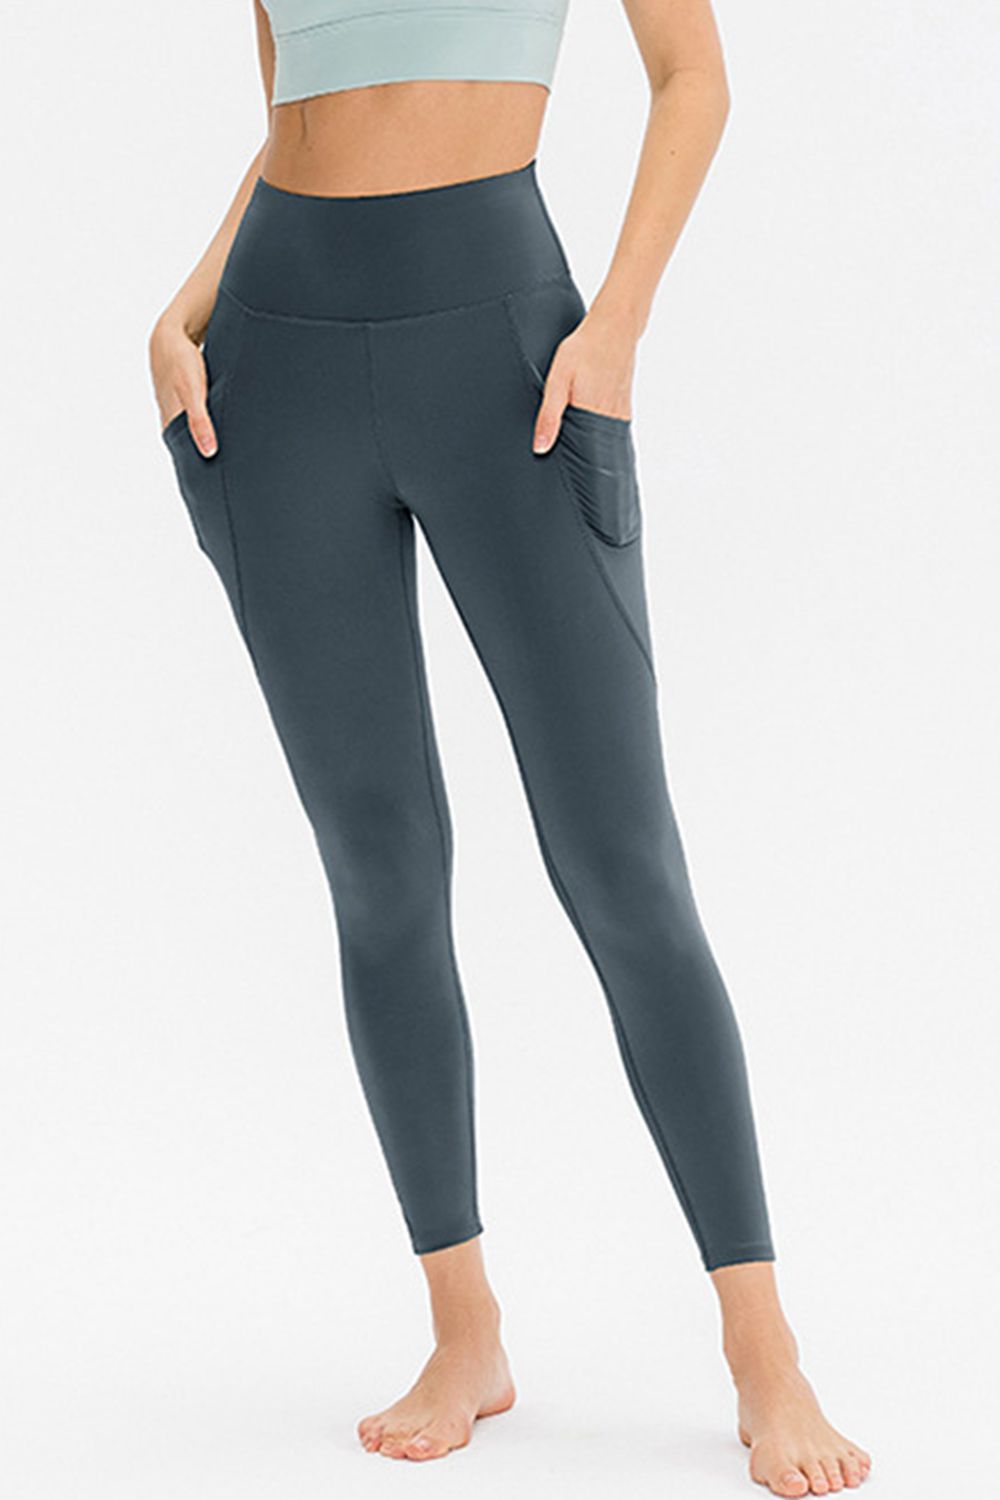 Slim Fit Long Active Leggings with Pockets - Dark Gray / S - Women’s Clothing & Accessories - Activewear - 9 - 2024